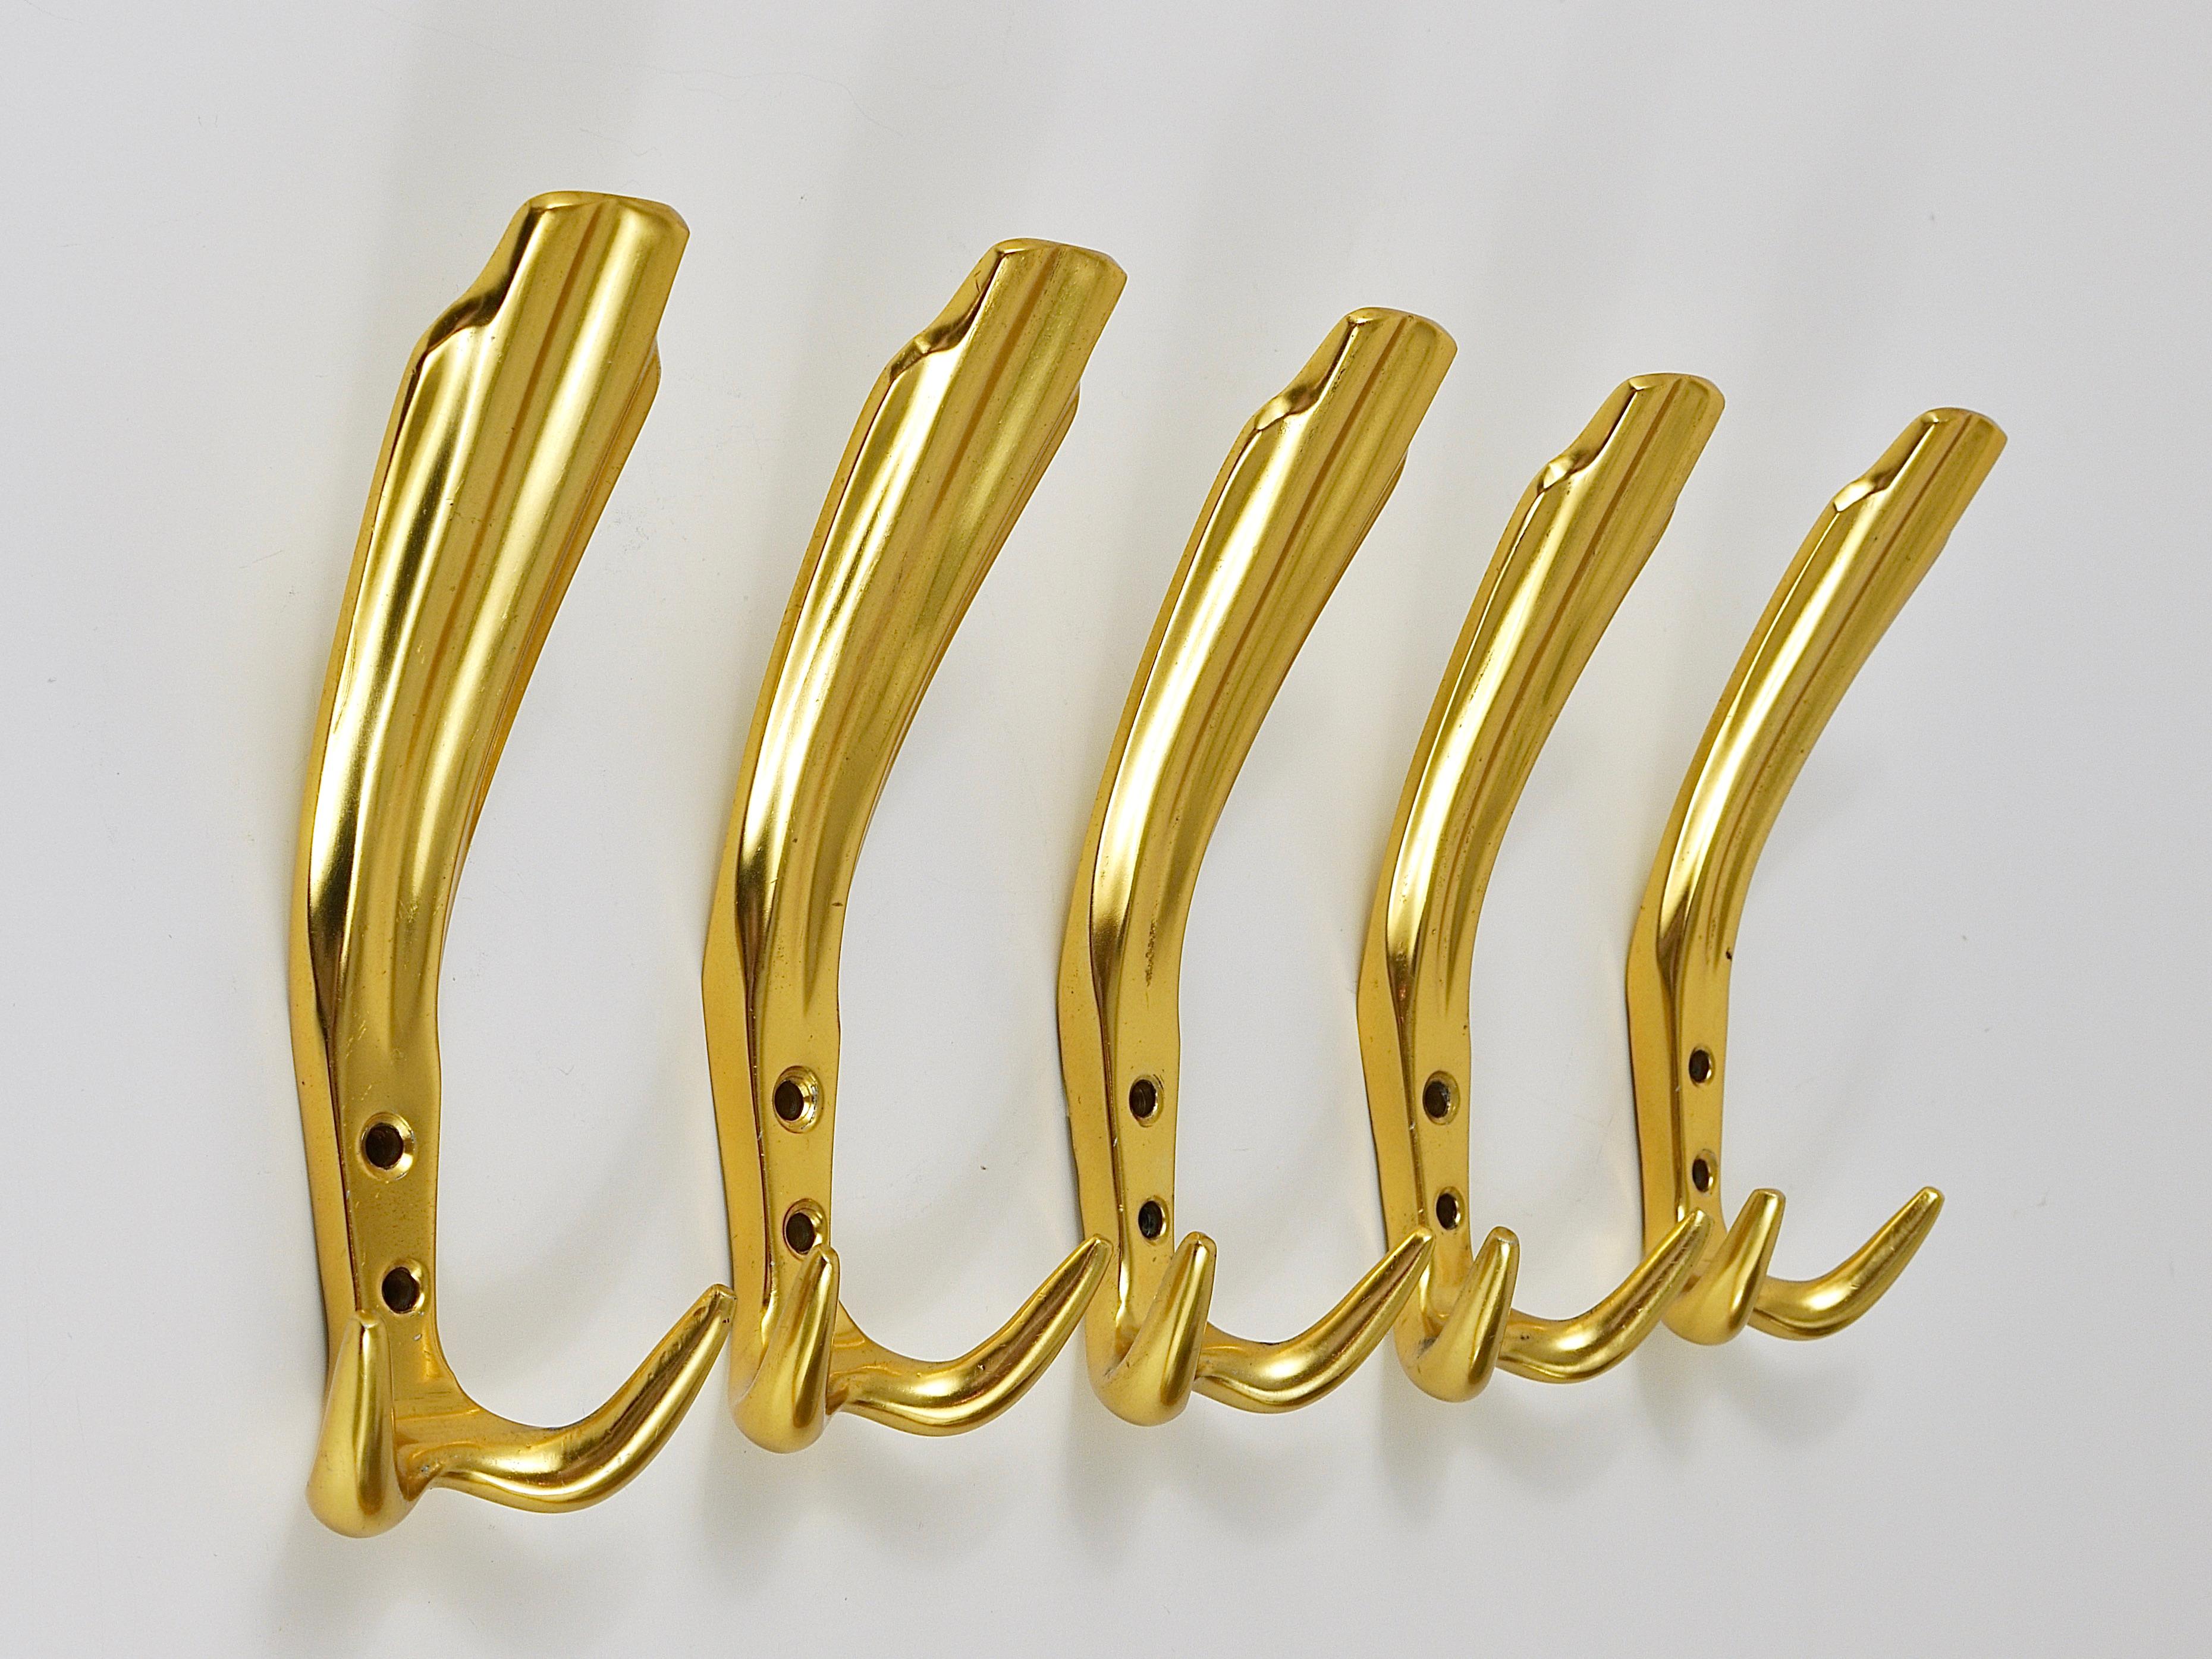 Up to Five Golden Hollywood Regency Wall Coat Hooks, Italy, 1970s For Sale 4